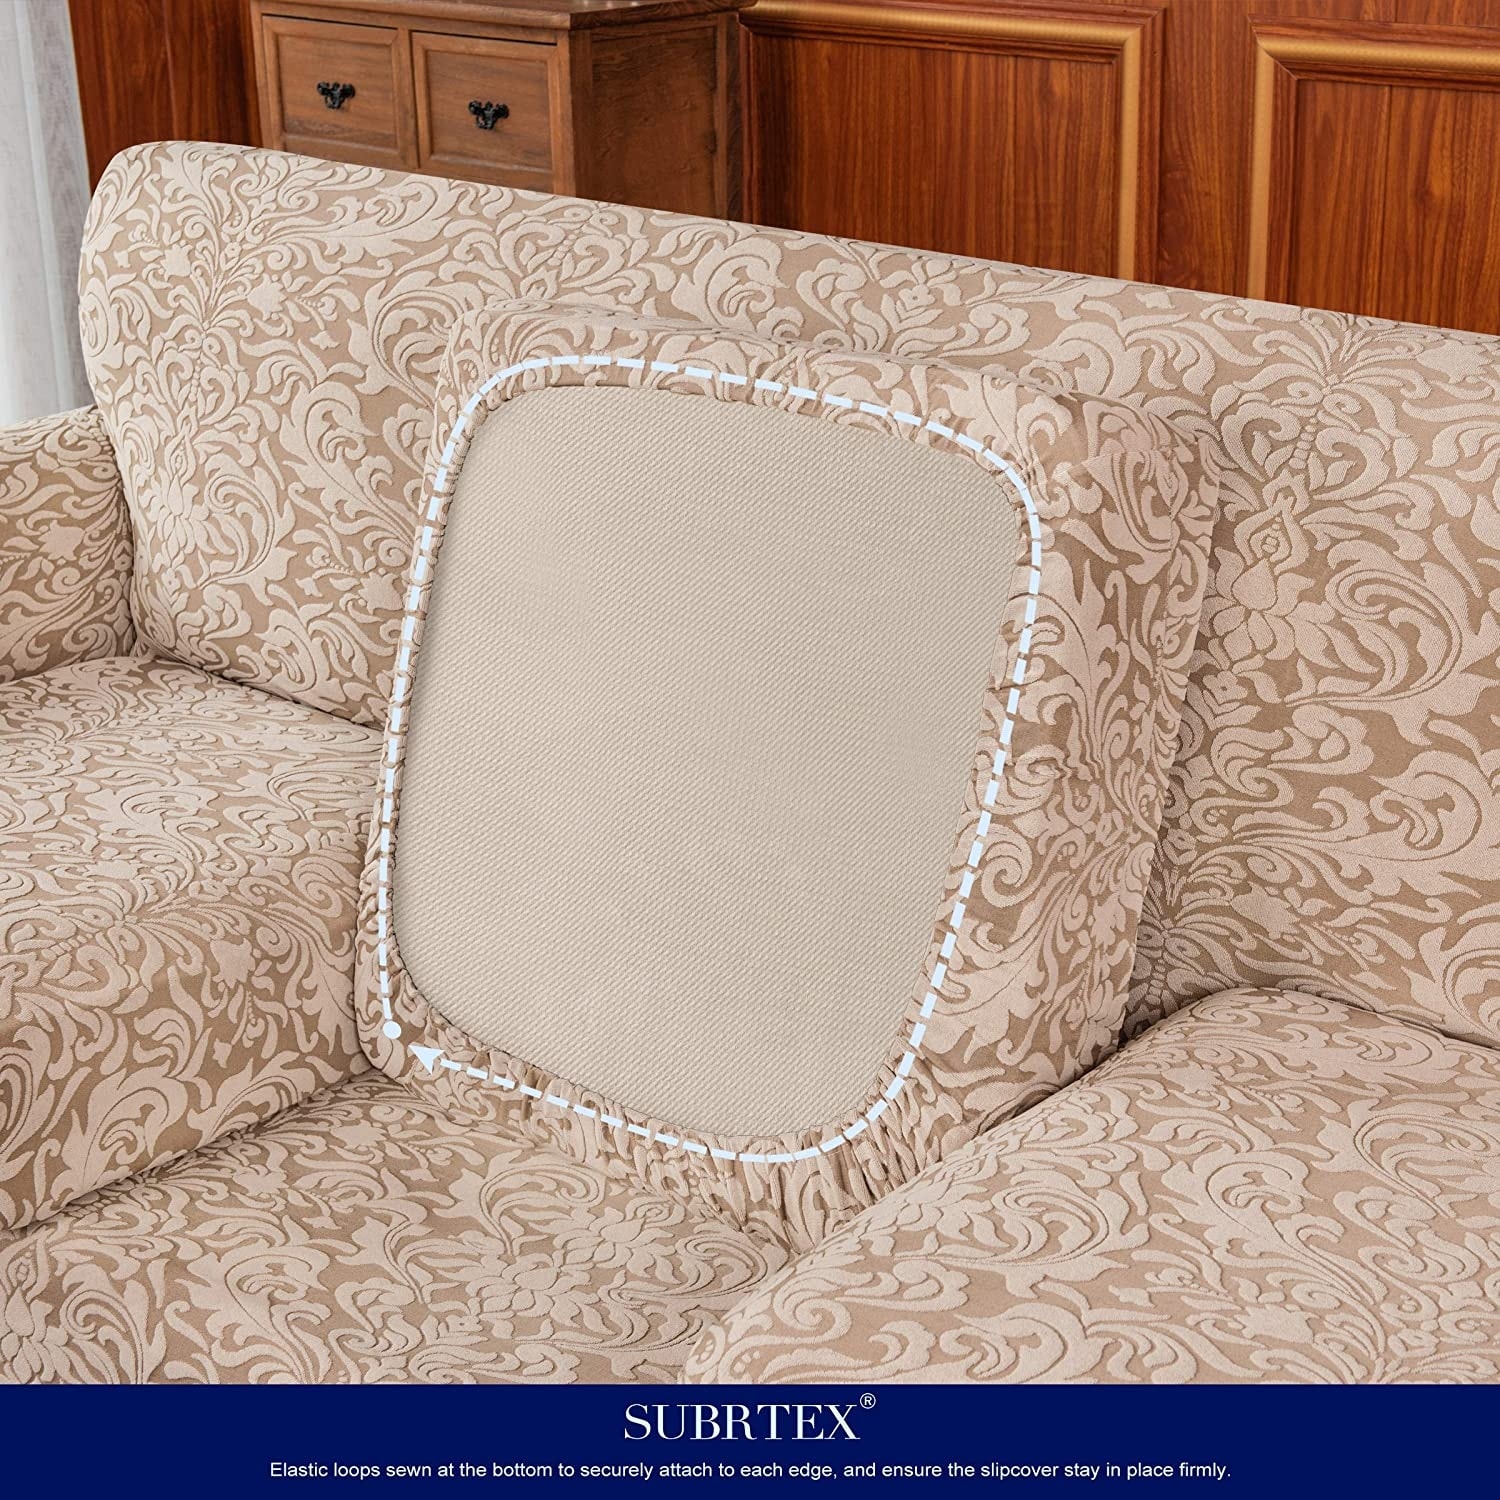 https://ak1.ostkcdn.com/images/products/is/images/direct/9defbf74961bf99965aea31bb098301a72d78c6a/Subrtex-3-piece-Separate-Couch-Cover-Jacquard-Damask-Stretch-Loveseat.jpg